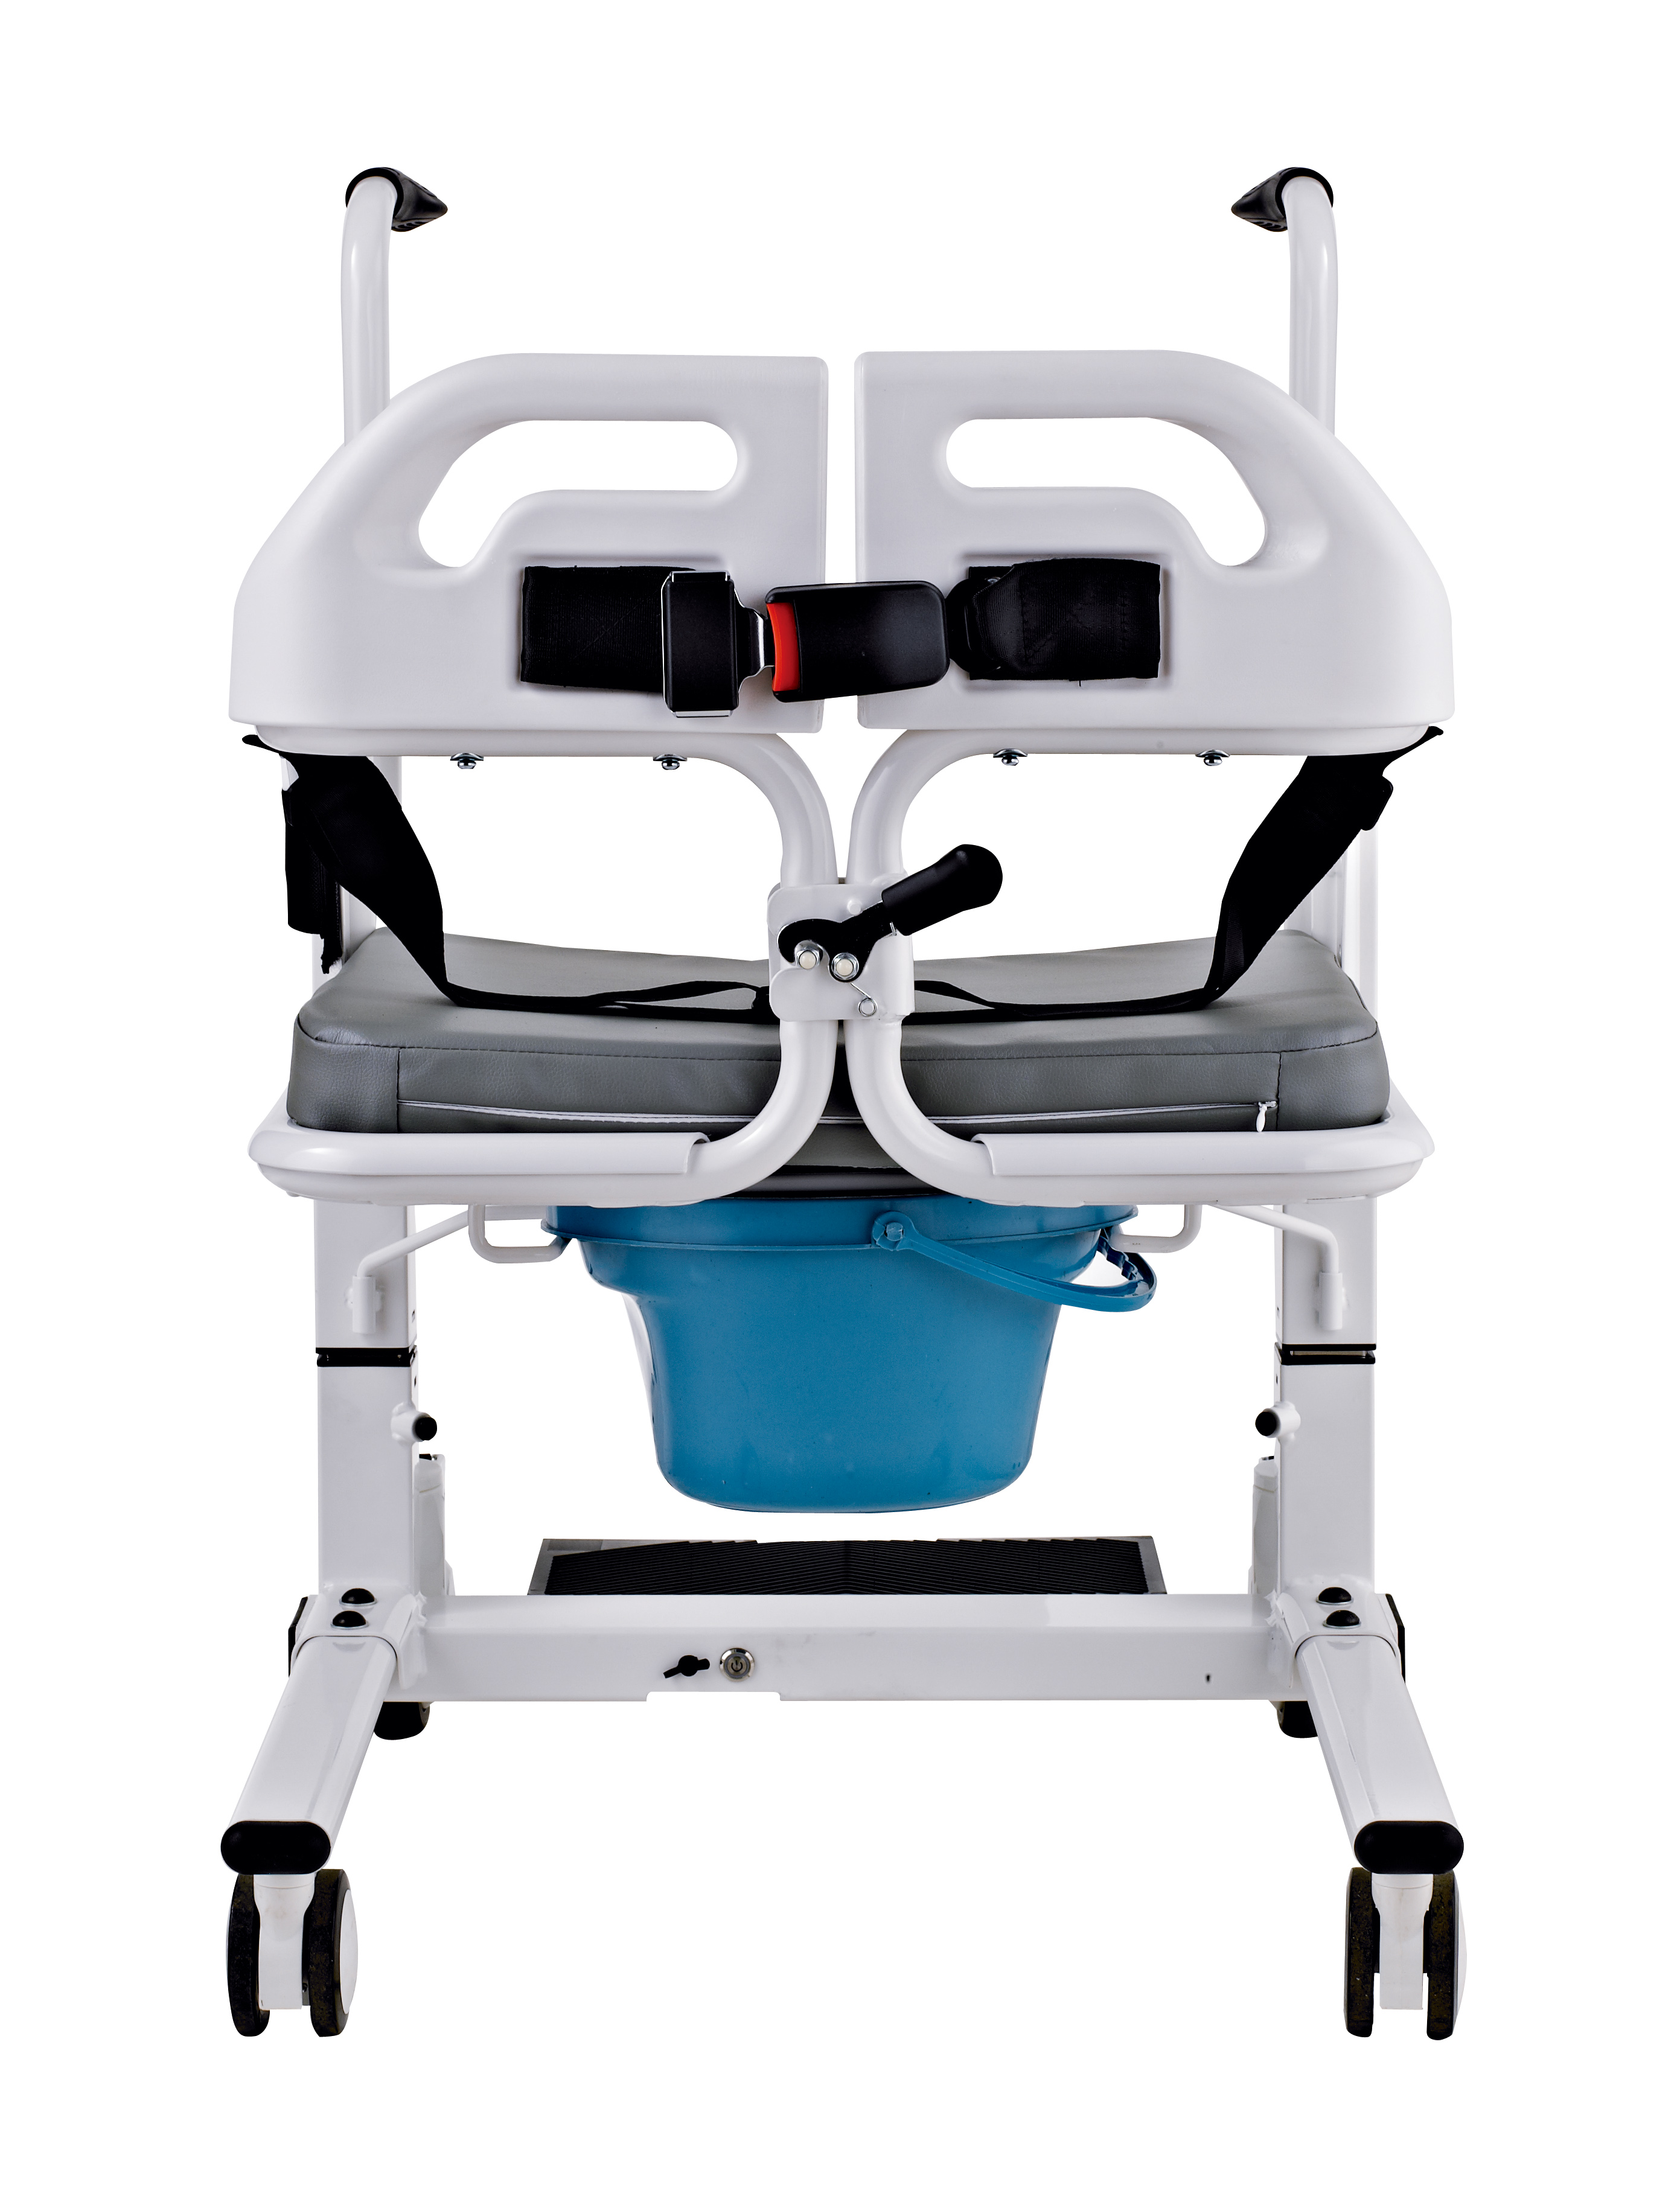 Easy Installed Electric Transfer Commode Wheelchair Manufacturers, Easy Installed Electric Transfer Commode Wheelchair Factory, Supply Easy Installed Electric Transfer Commode Wheelchair